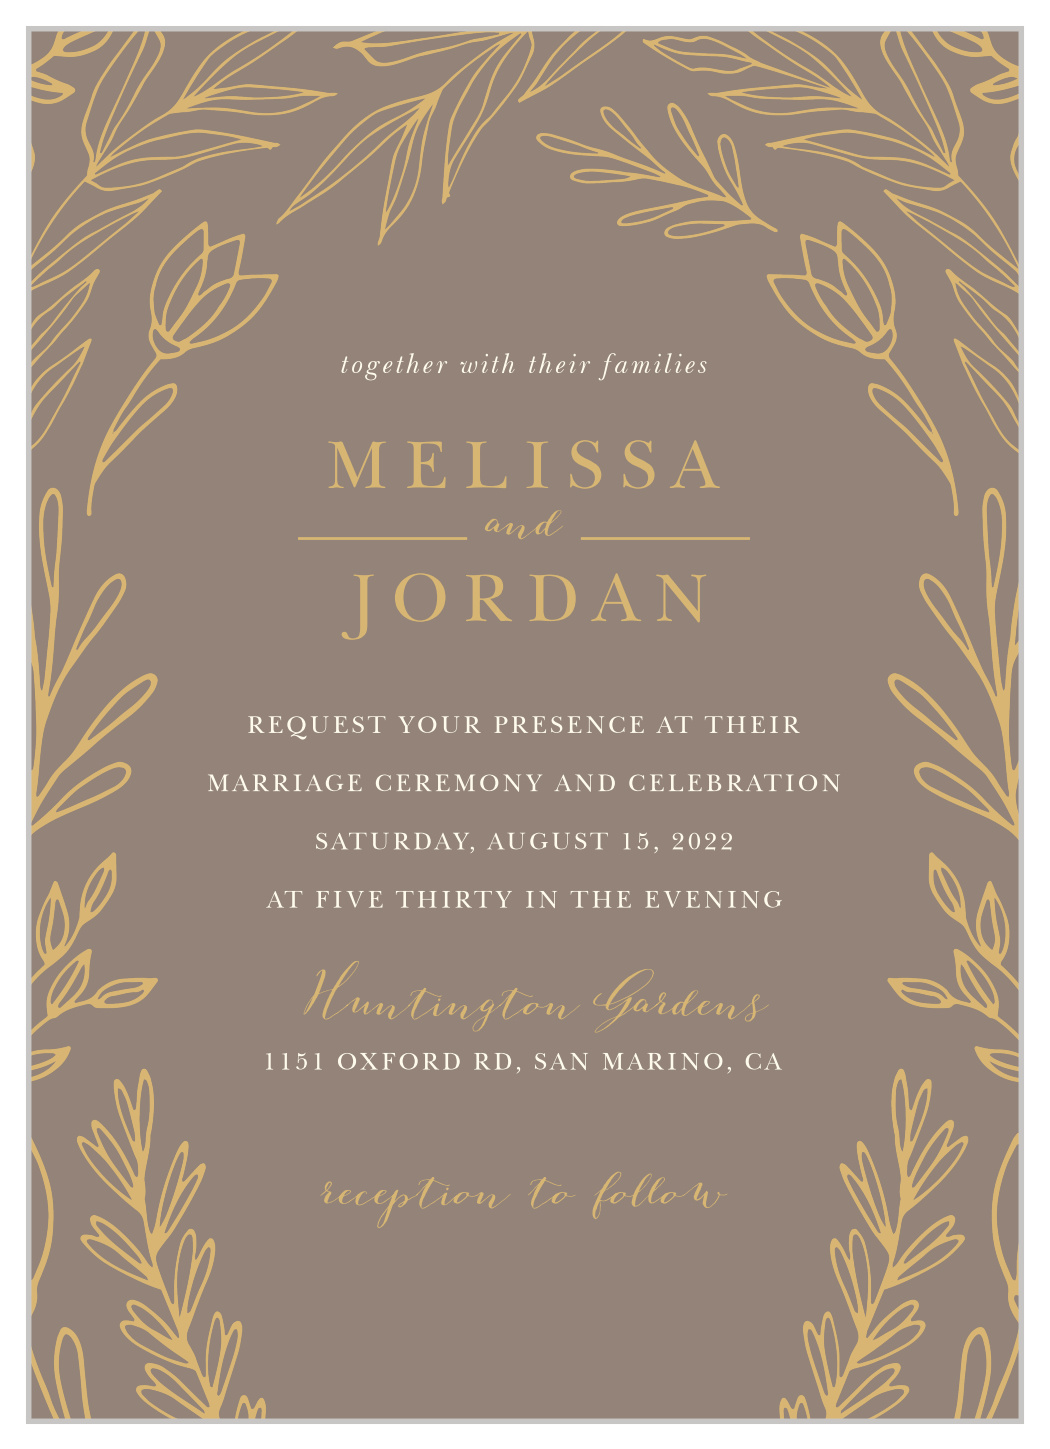 Wedding Invitation Together With Their Families | wedding